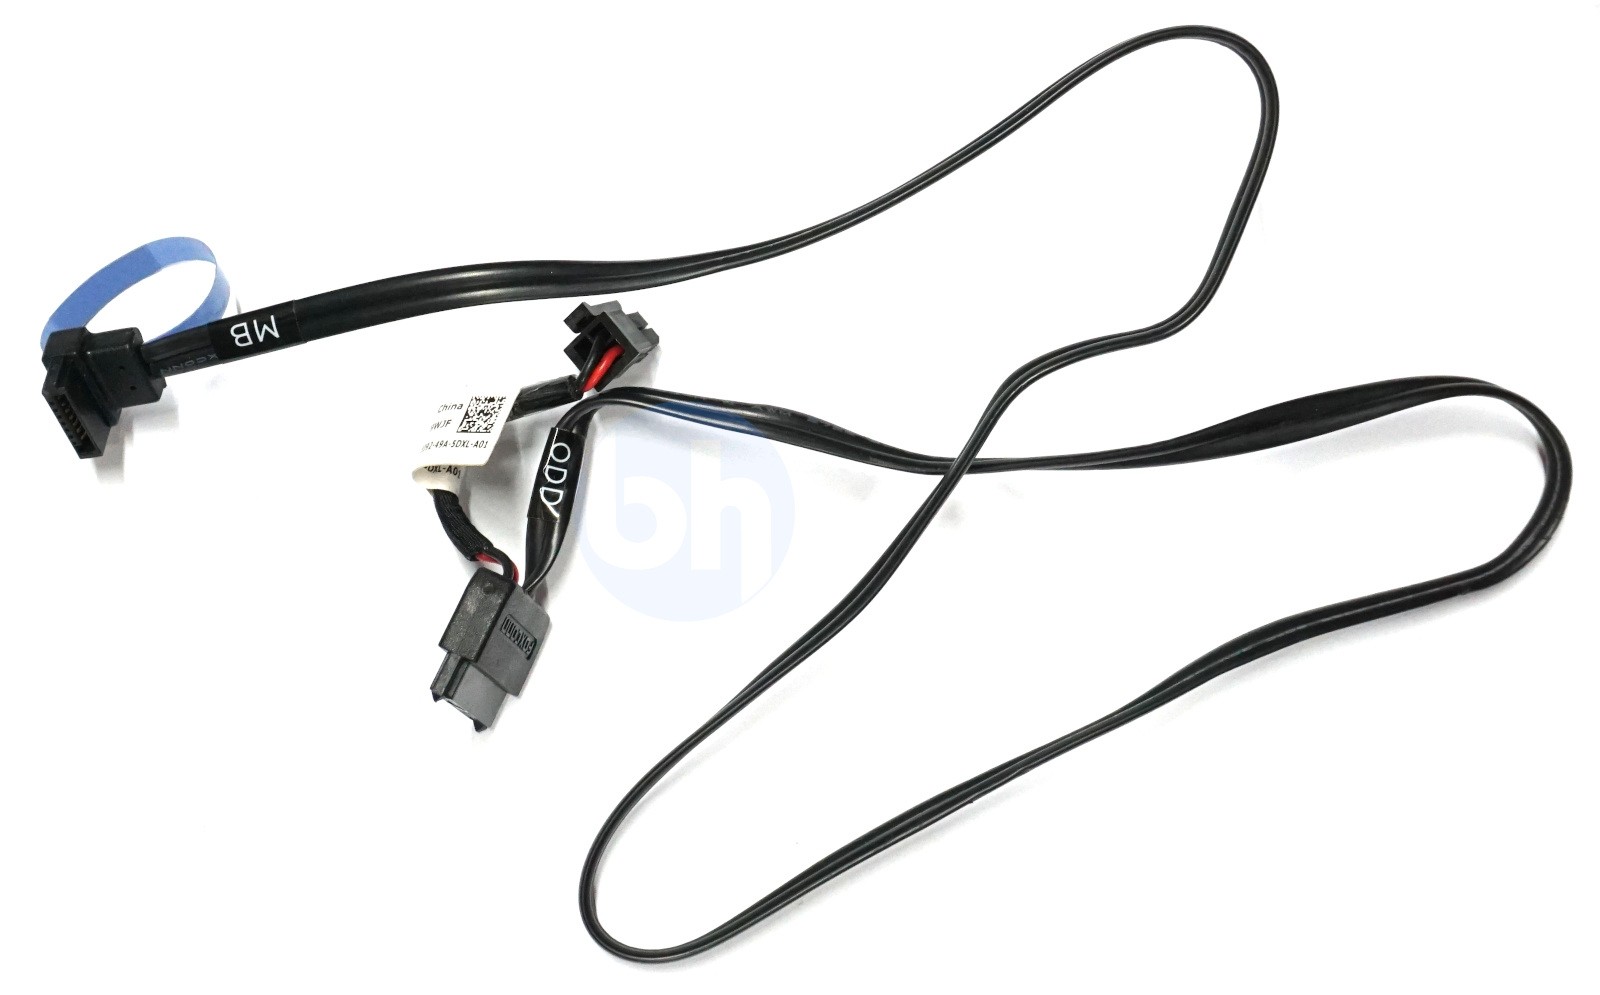 Dell PowerEdge R720 Optical SATA Power Connector Cable